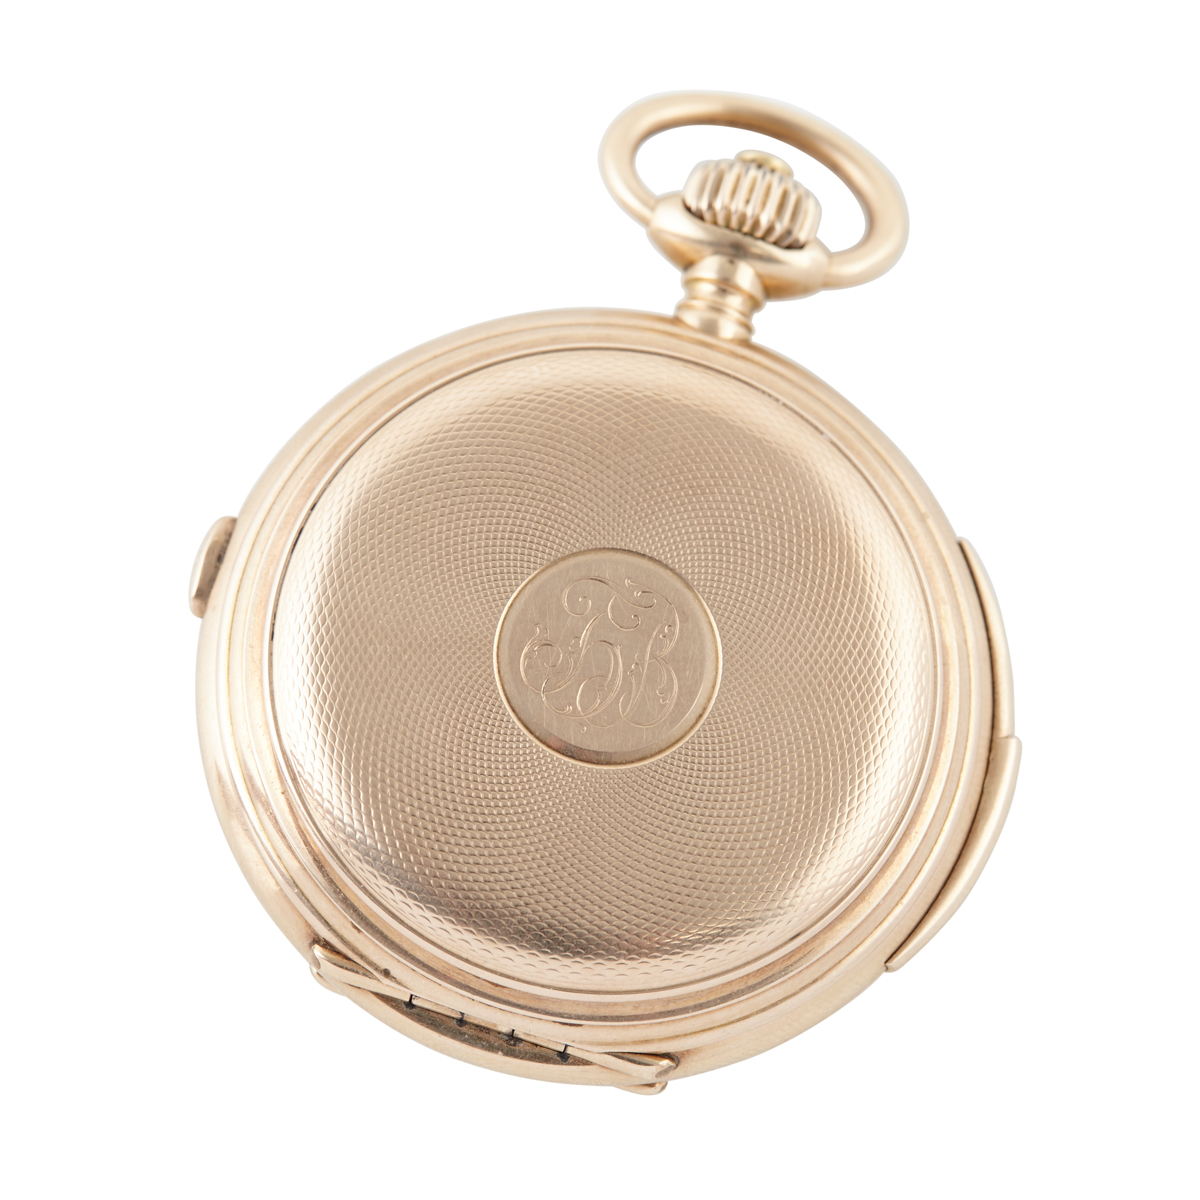 Borel Fils & Co. Of Neuchatel Triple Date Chronograph Minute Repeat Pocket Watch With Moon Phase; 